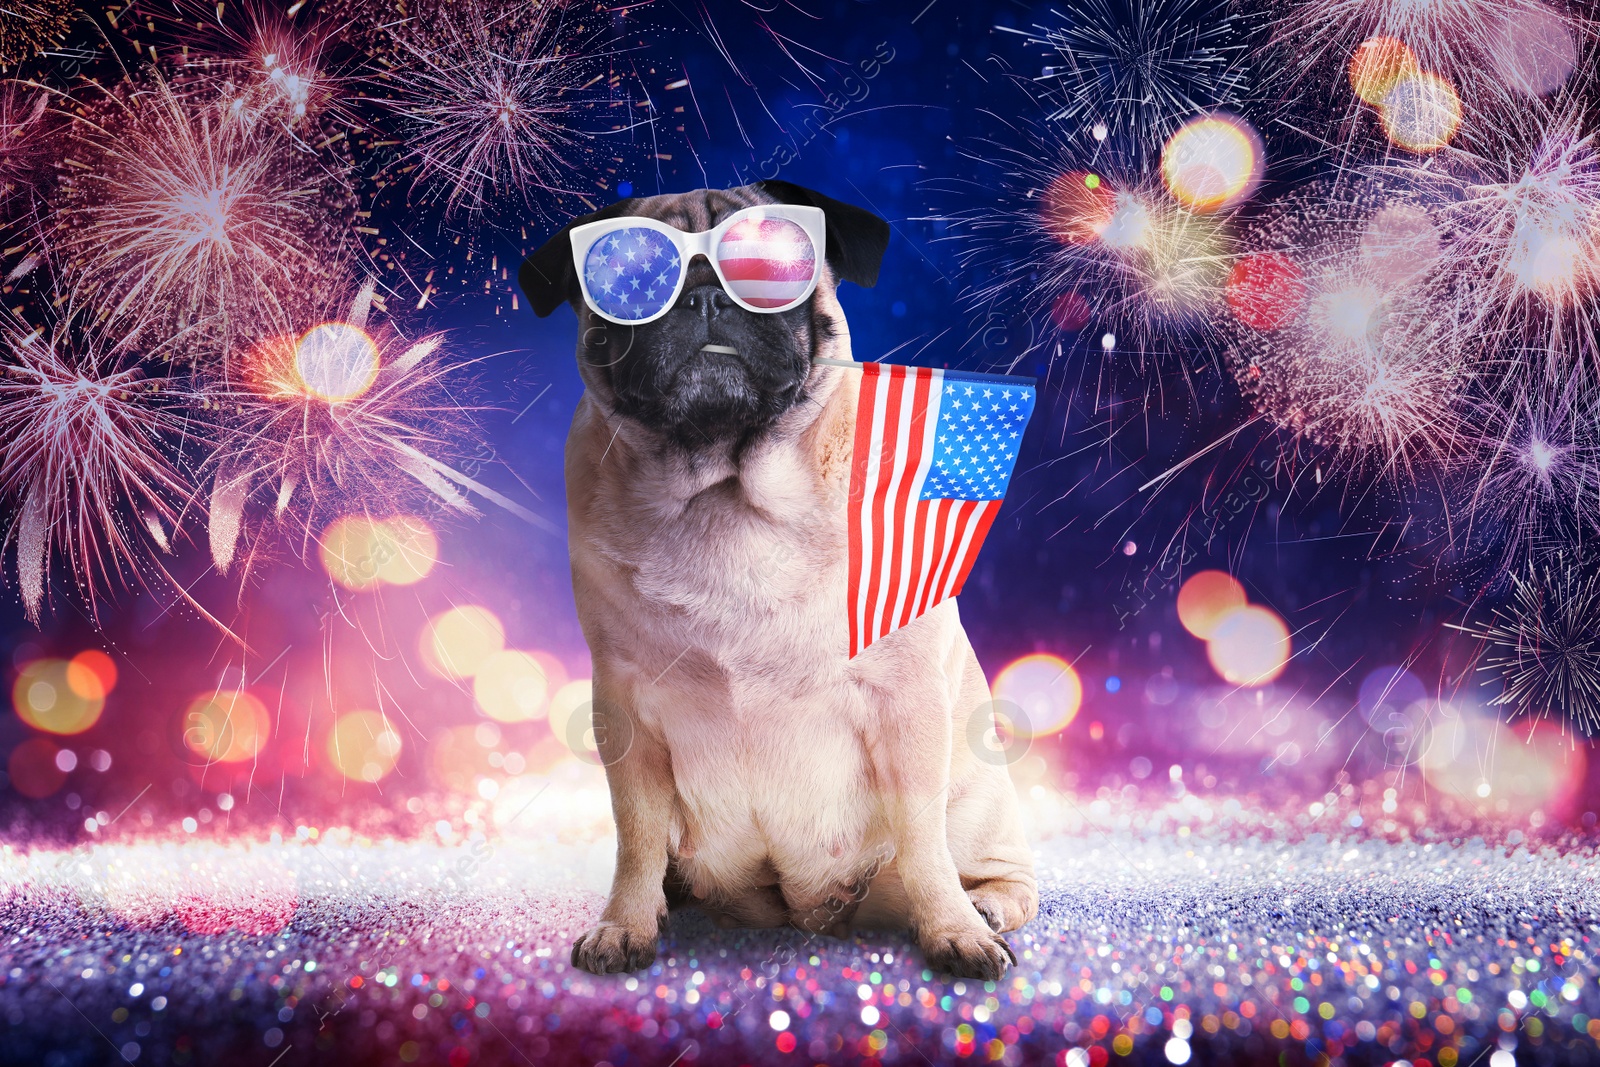 Image of 4th of July - Independence Day of USA. Cute dog with sunglasses and American flag on festive background with fireworks and glitters, bokeh effect